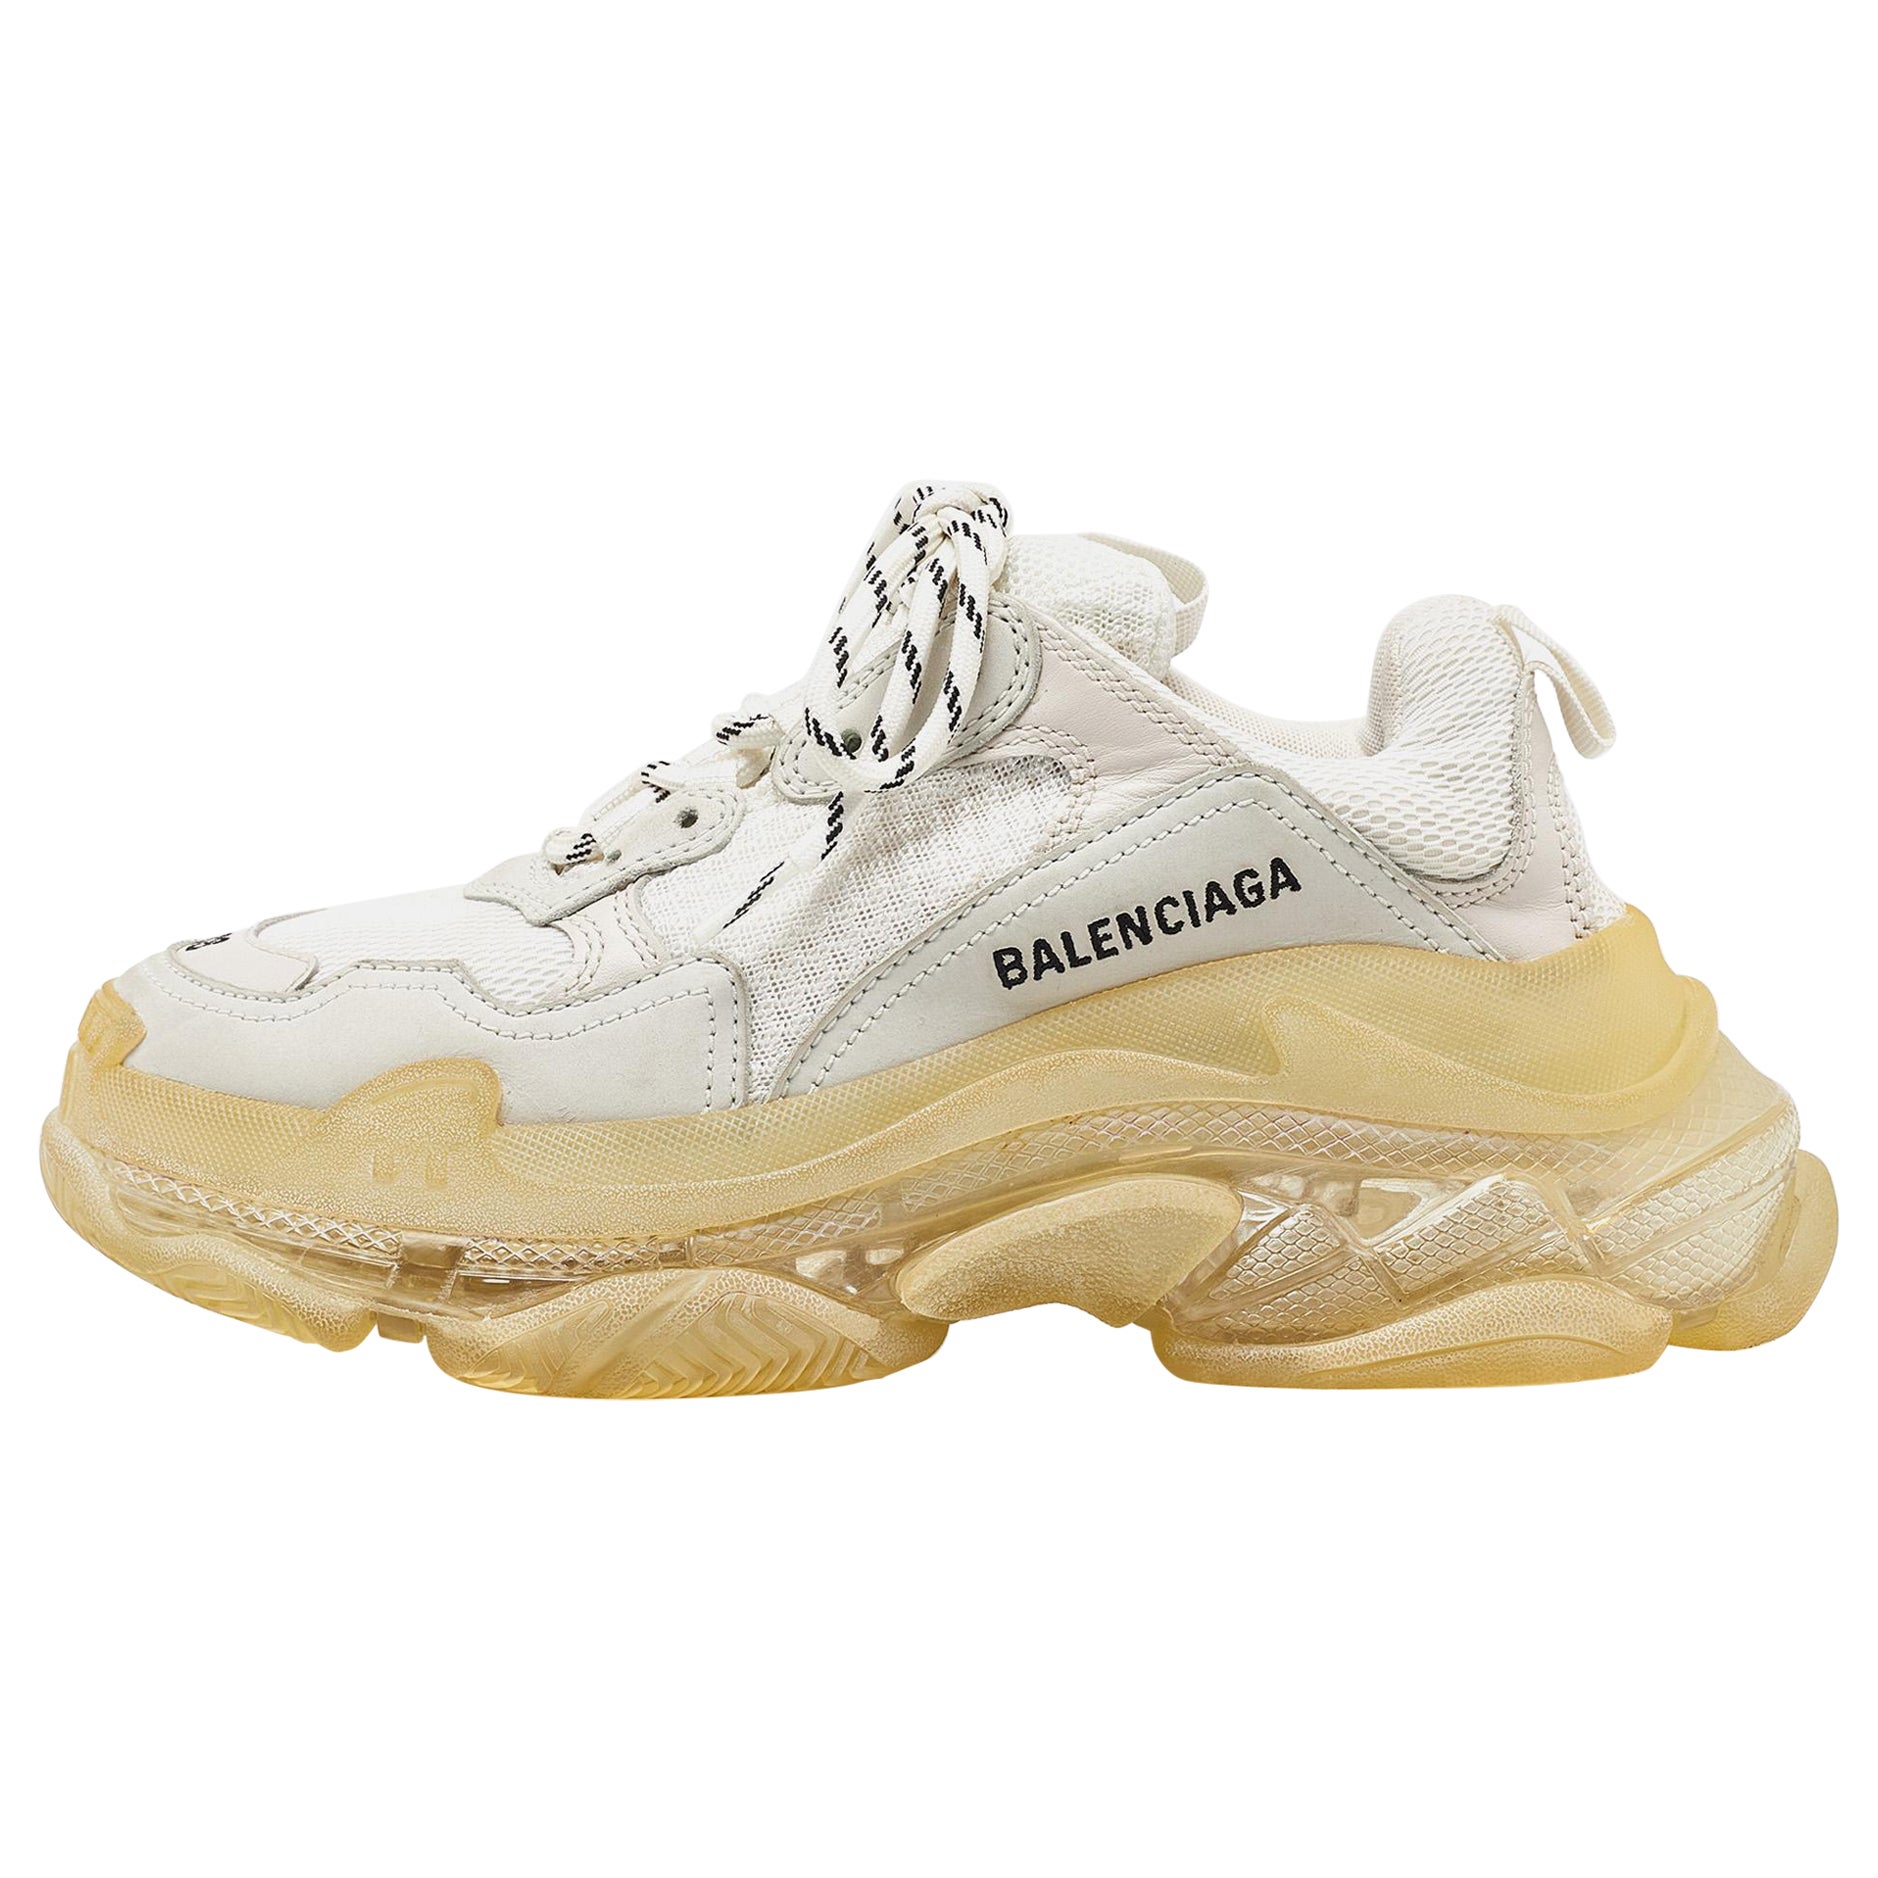 What are Balenciaga shoes made out of?